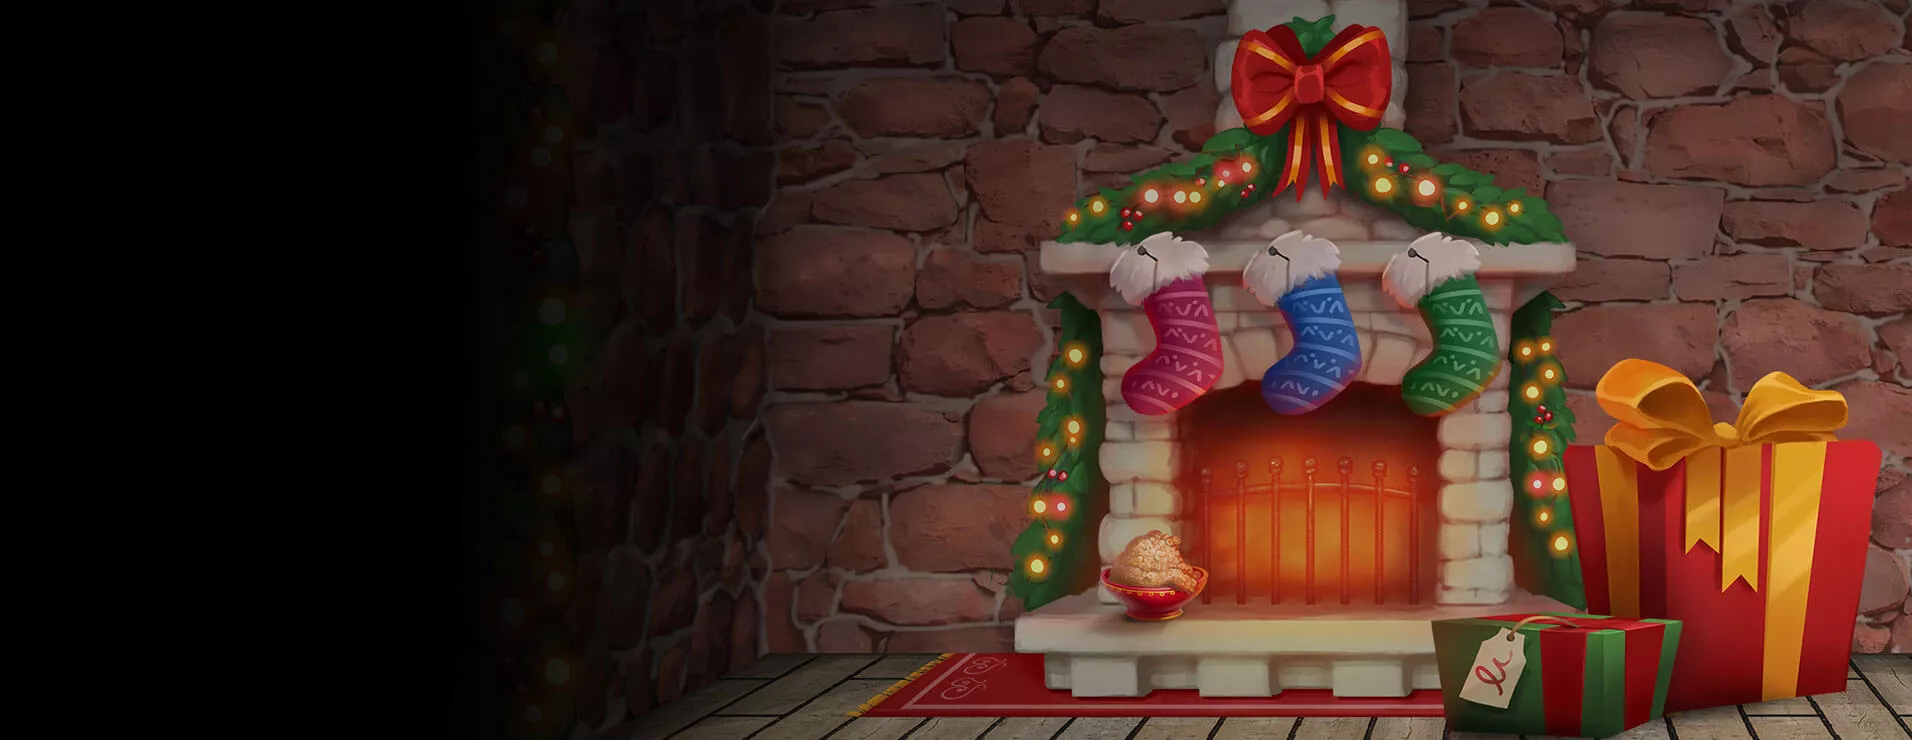 Banner for Christmas bonus and slots page showing a fireplace and presents